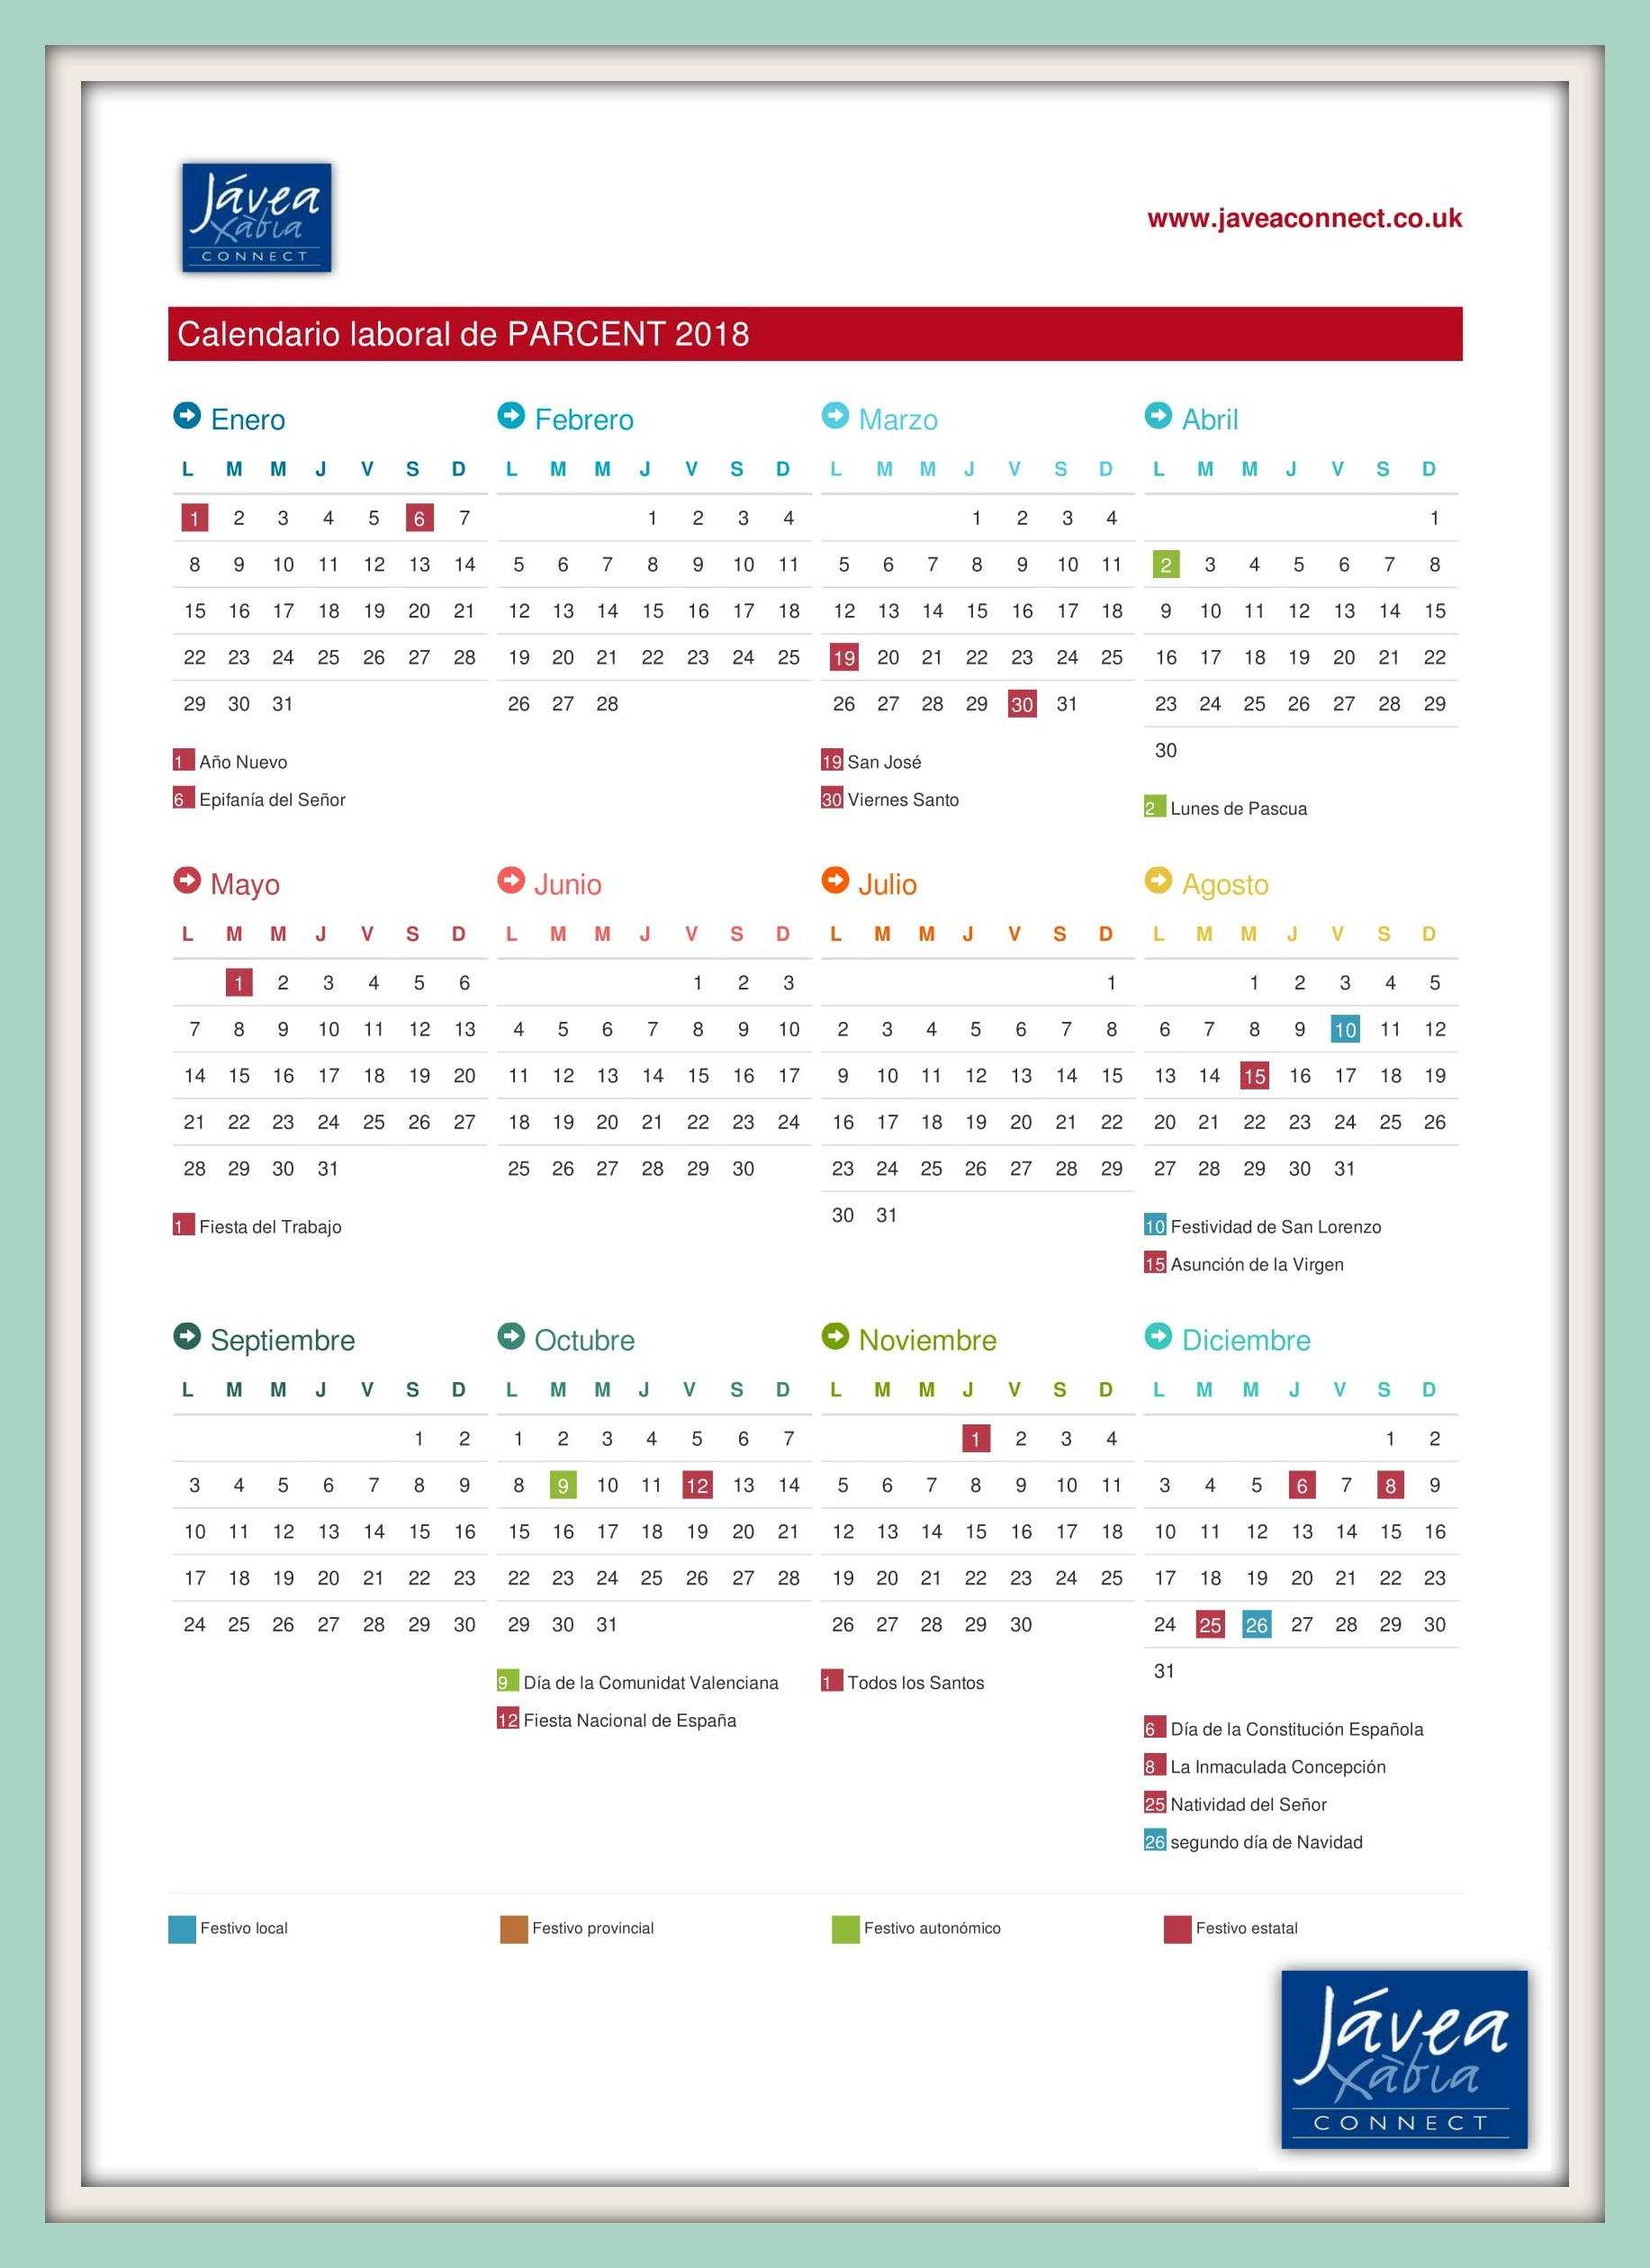 National, Regional & Local Holiday Calendars for Local Towns & Villages 2018 - Javea Connect